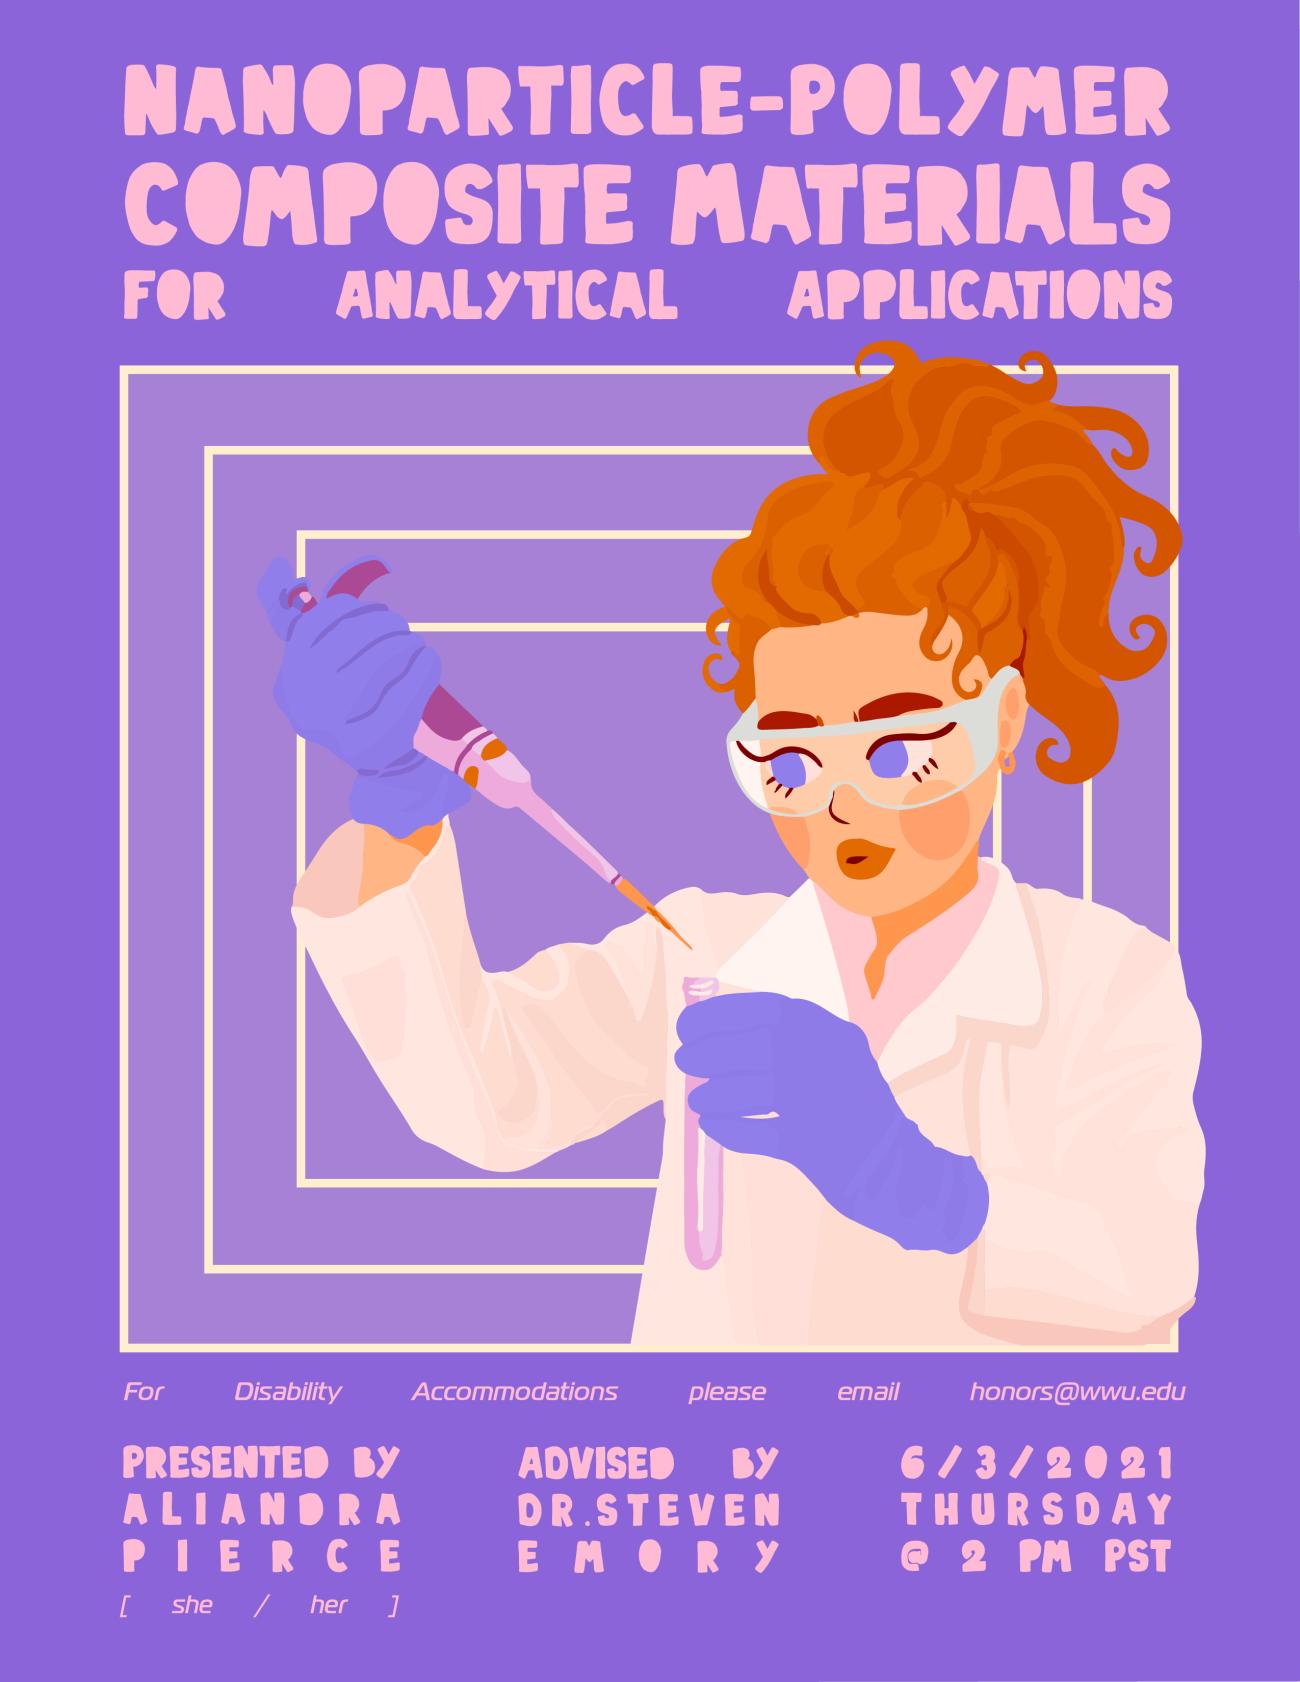 Digital painting of Aliandra holding an autopipette and test tube, on a purple background. Text reads: "Nanoparticle-Polymer Composite Materials for Analytical Applications. Presented by Aliandra Pierce (she/her). Advised by Dr. Steven Emory. 6/3/2021, Thursday @ 2 PM PST. For disability accommodations please email honors@wwu.edu". 